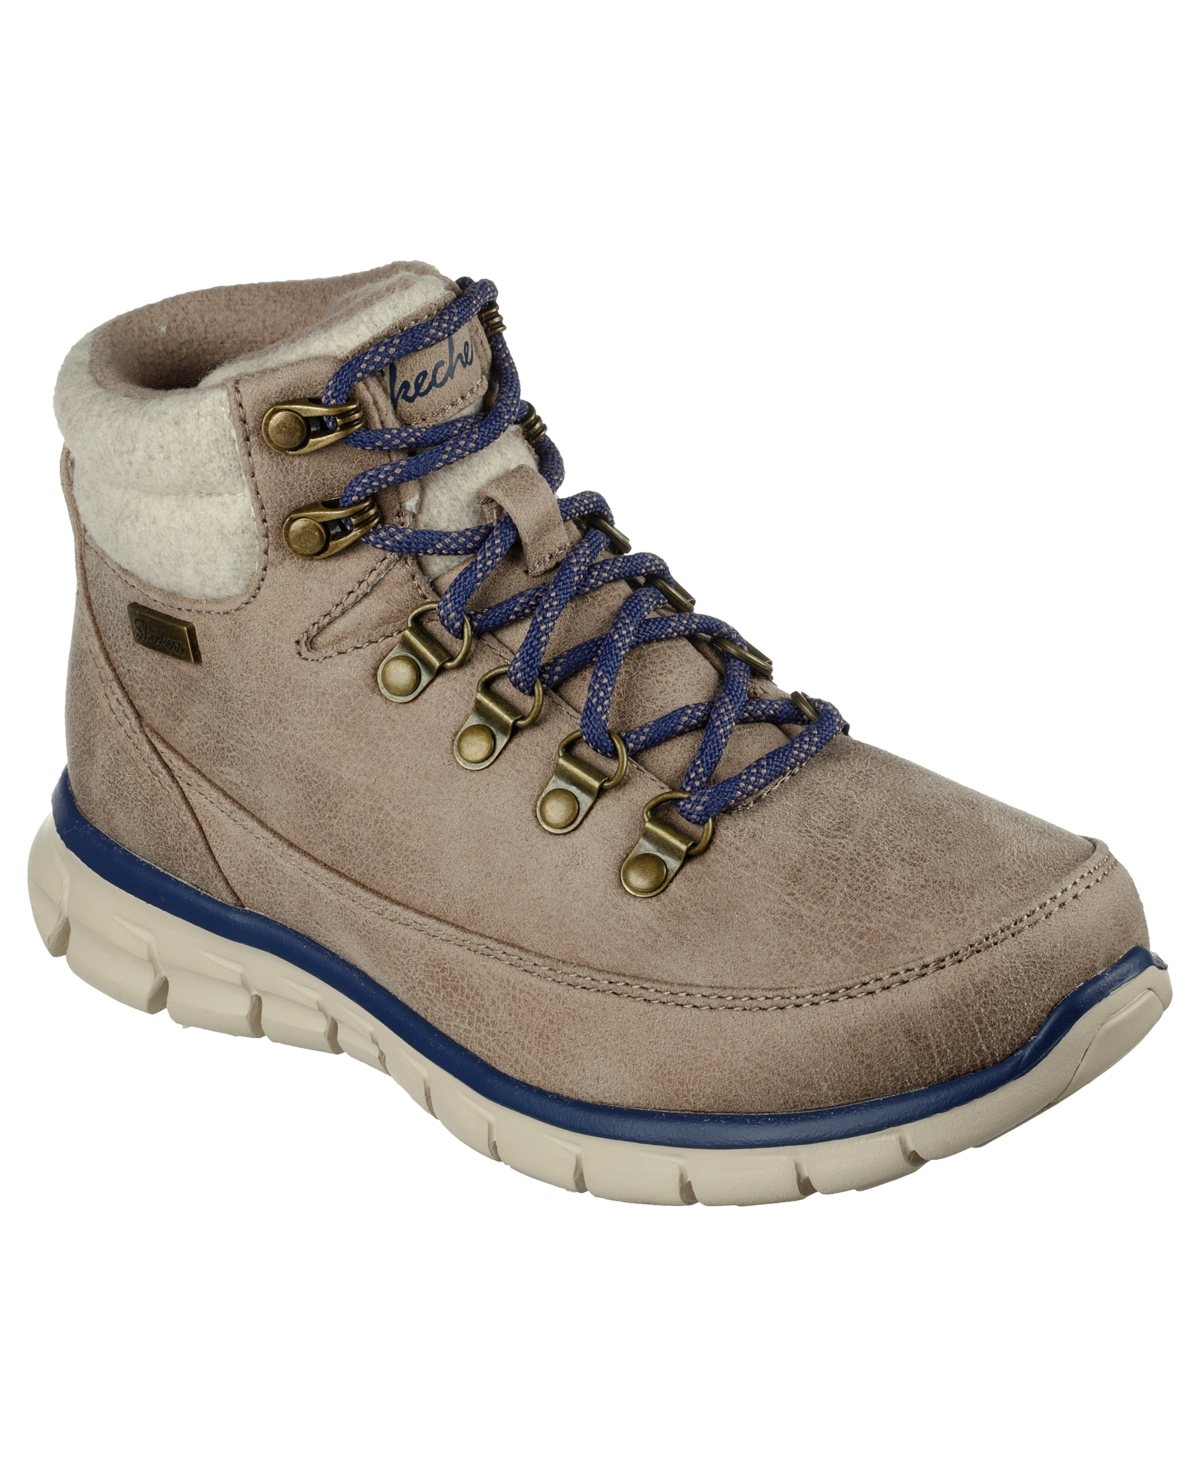 Women's Synergy - Cool Seeker Hiking Boots from Finish Line - Taupe